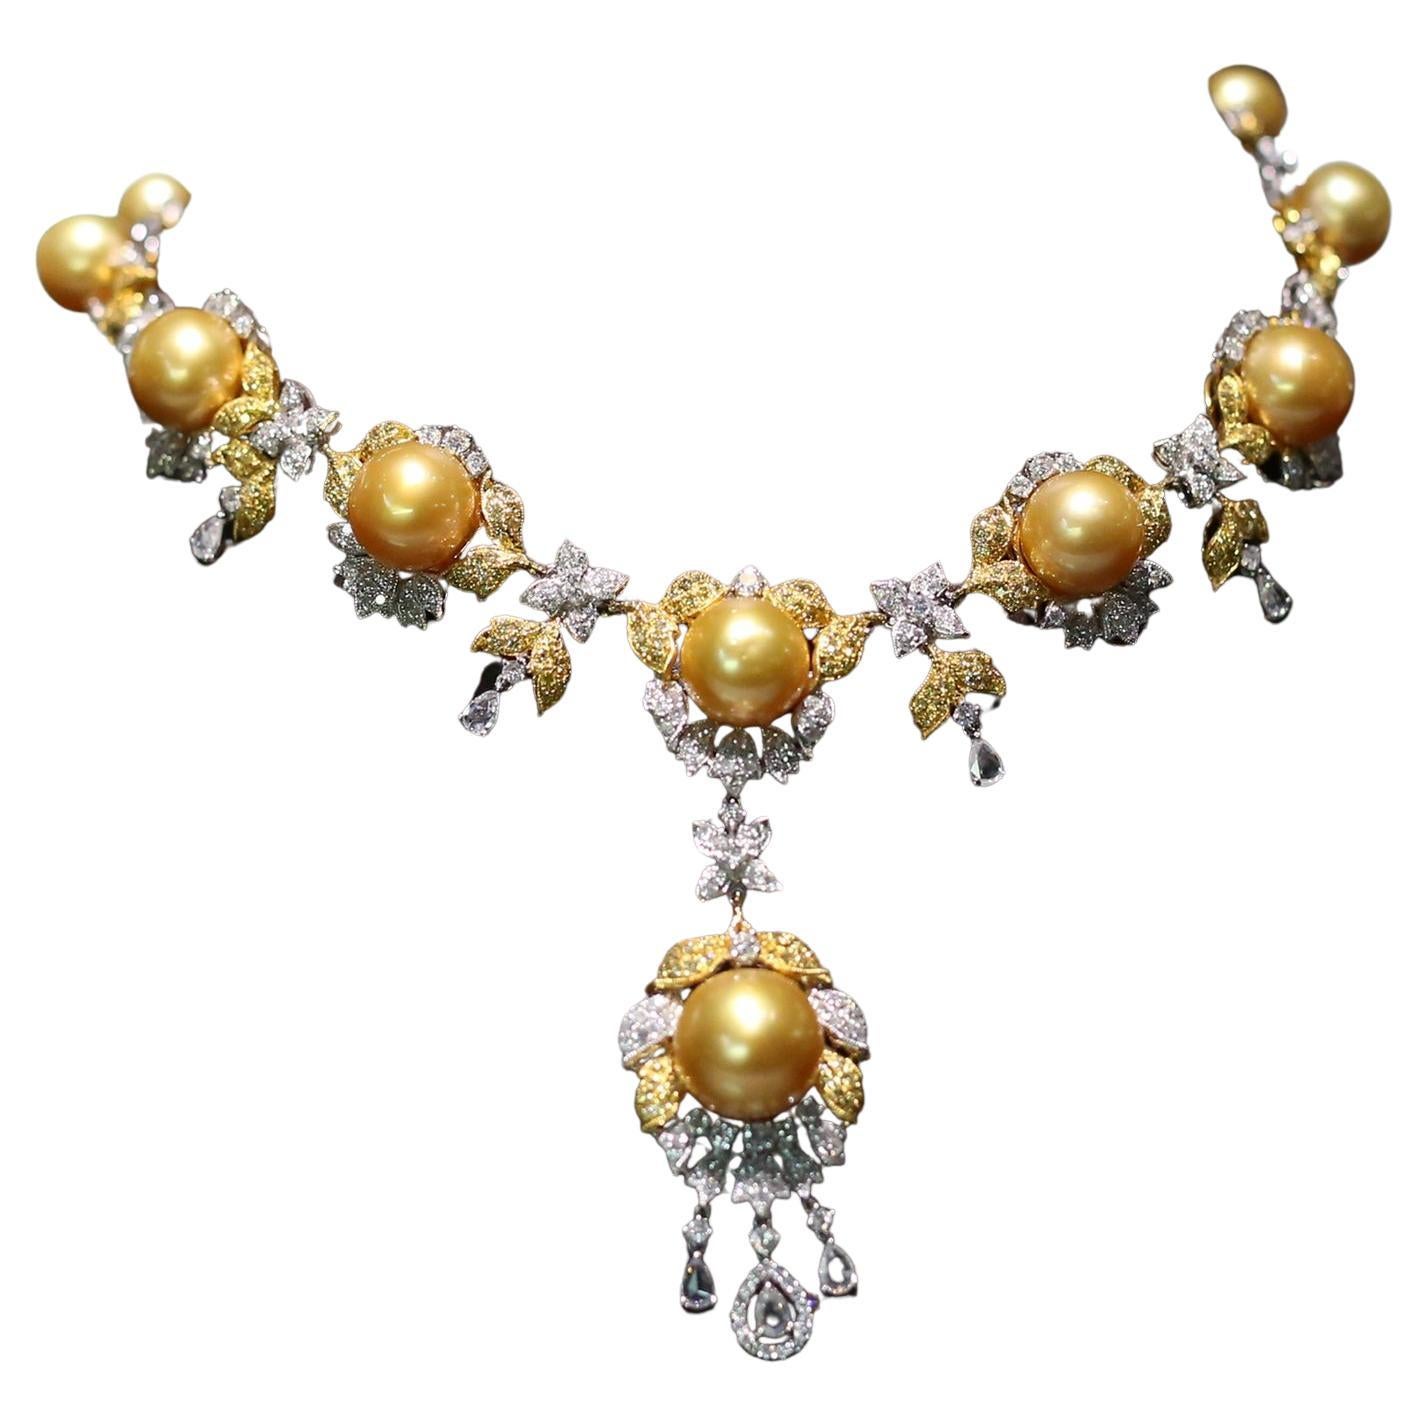 NWT $99, 000 Gorgeous 18KT South Sea Golden Pearl Fancy Yellow Diamond Necklace